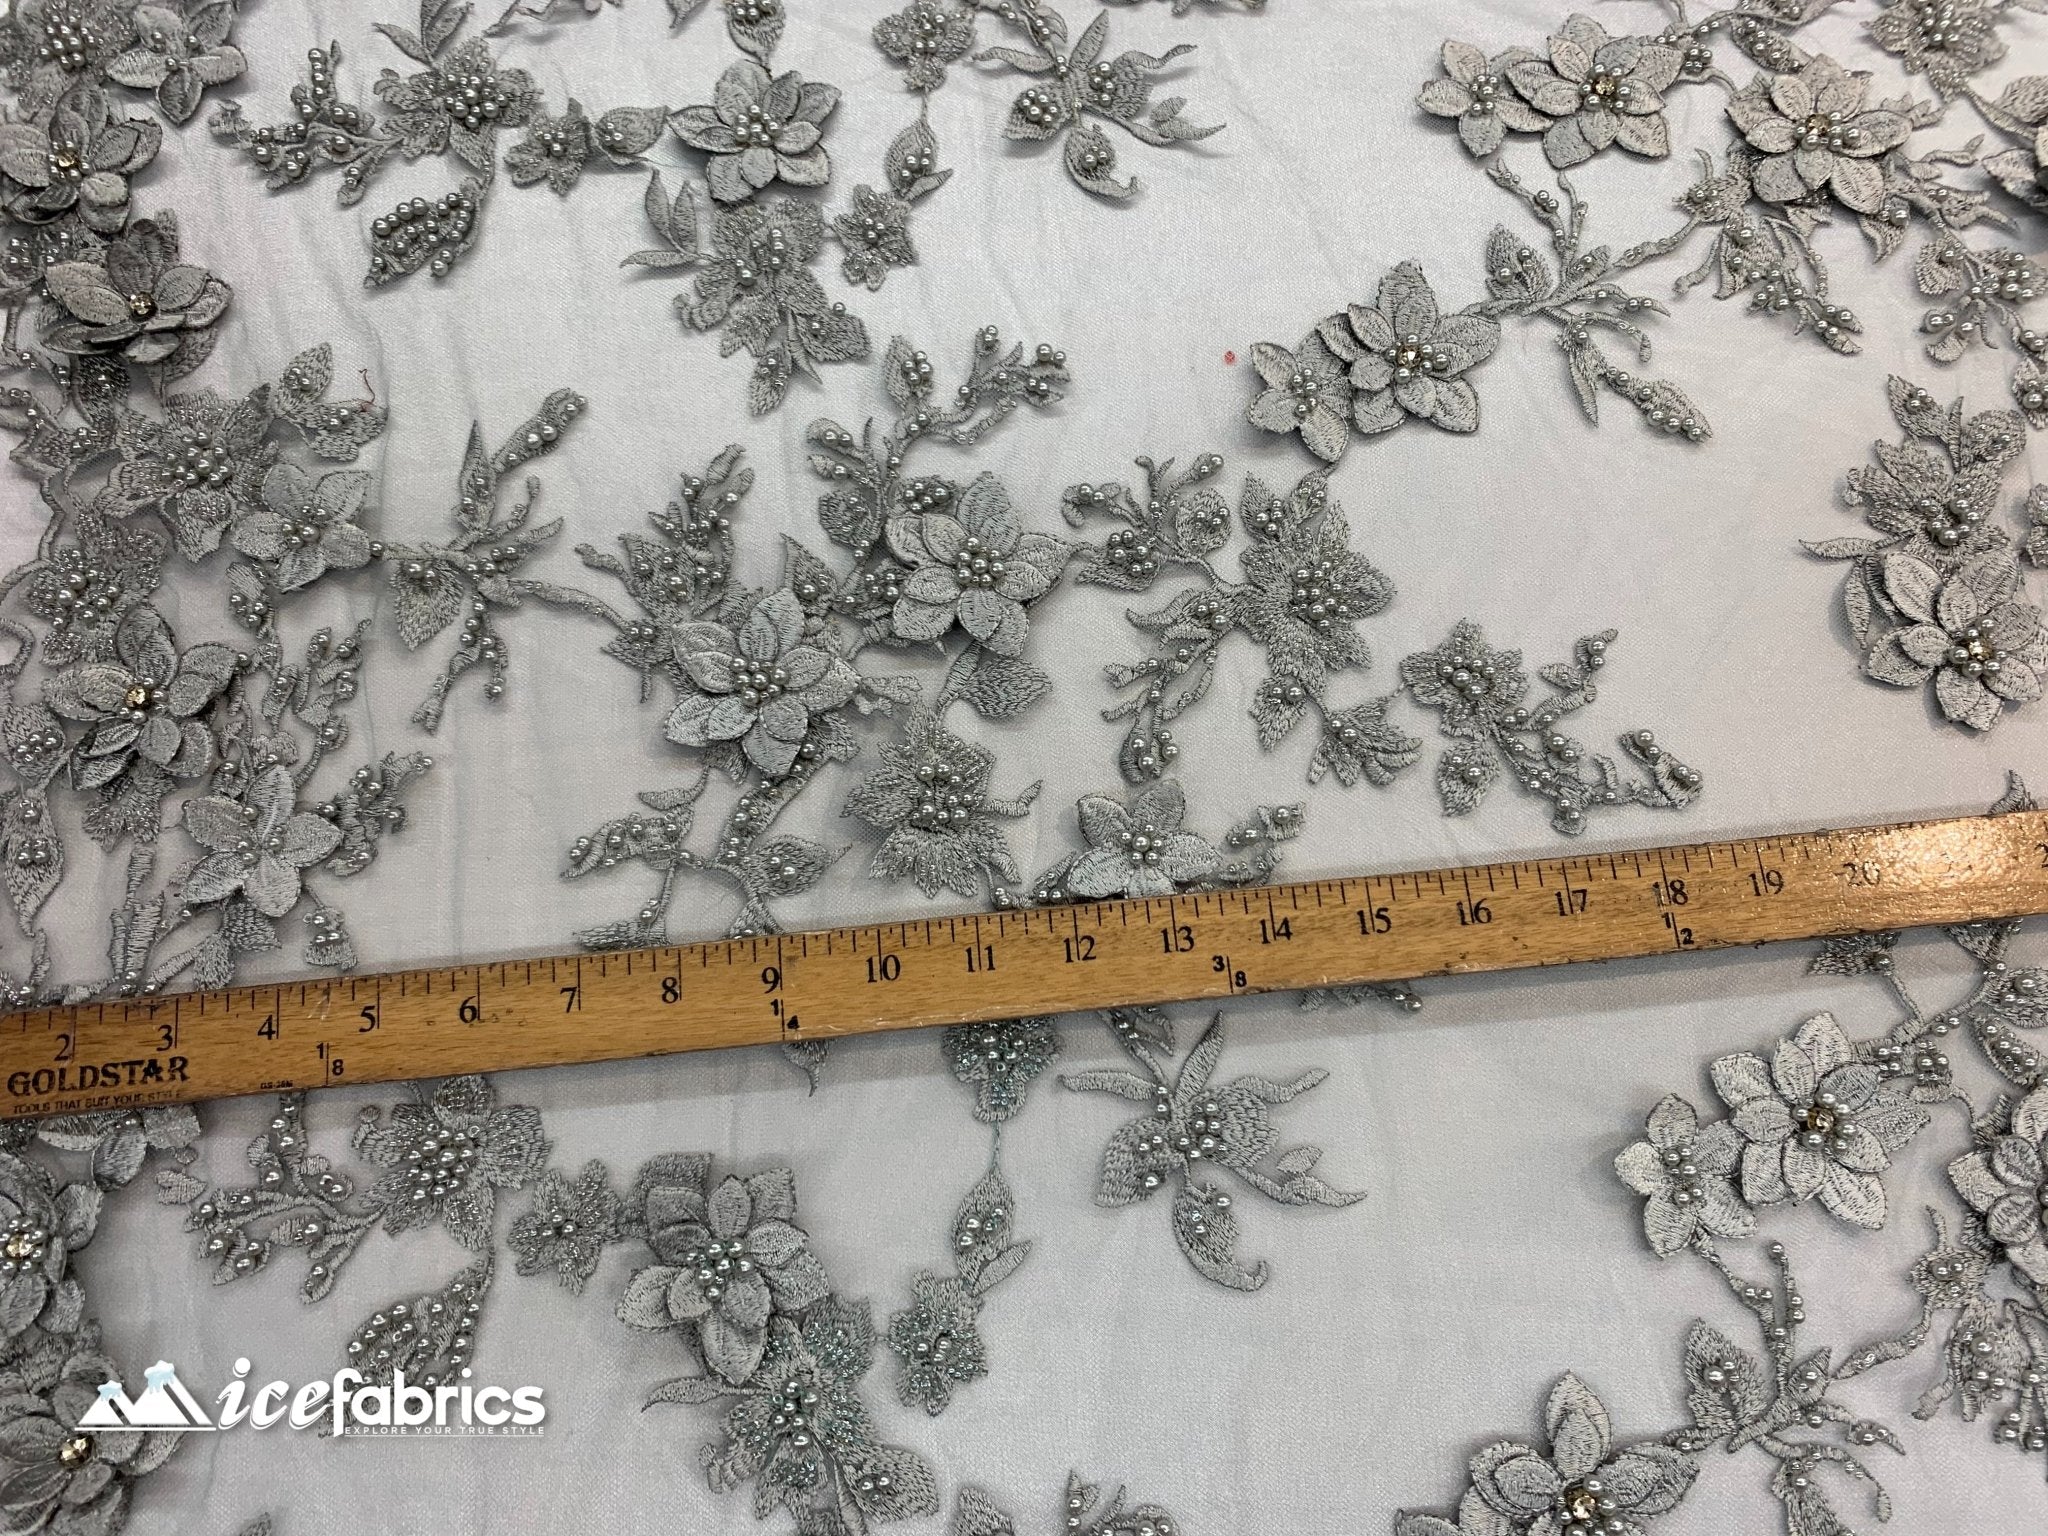 Flowers Embroidered Beaded Fabric/ Mesh Lace Fabric/ Bridal Fabric/ICE FABRICSICE FABRICSSilverFlowers Embroidered Beaded Fabric/ Mesh Lace Fabric/ Bridal Fabric/ ICE FABRICS Silver